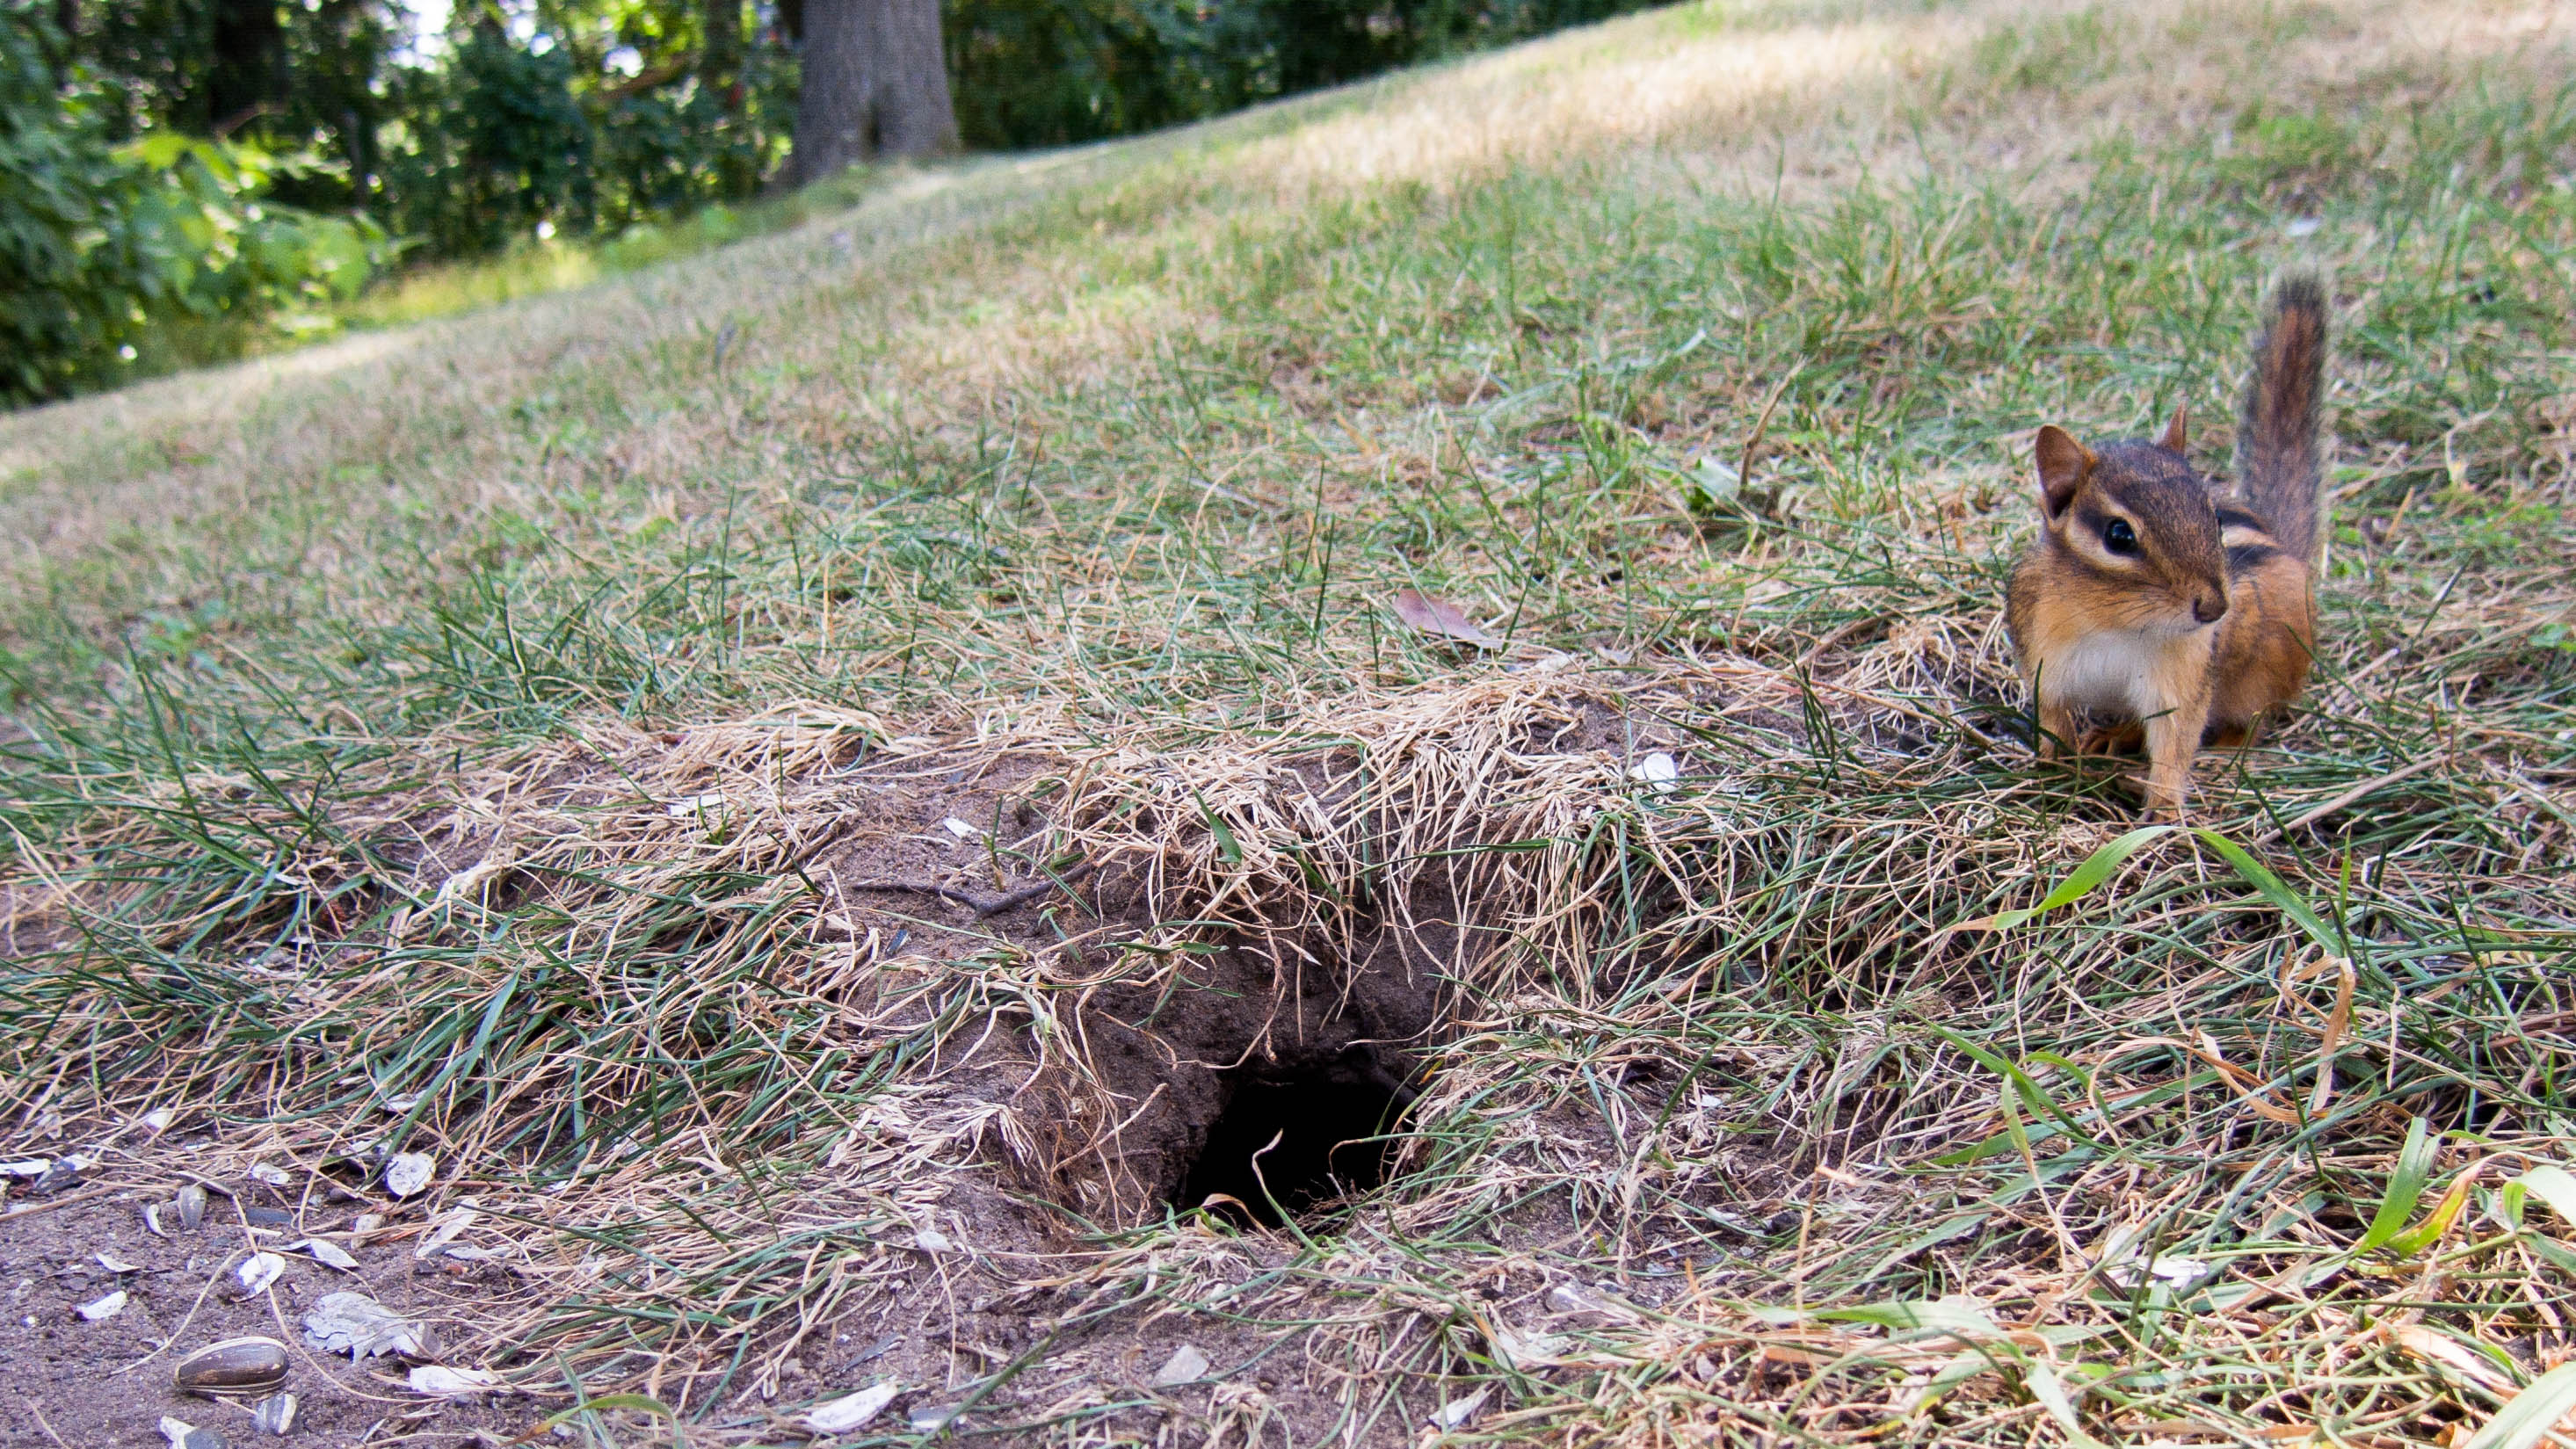 Squirrel next to its hole in the ground